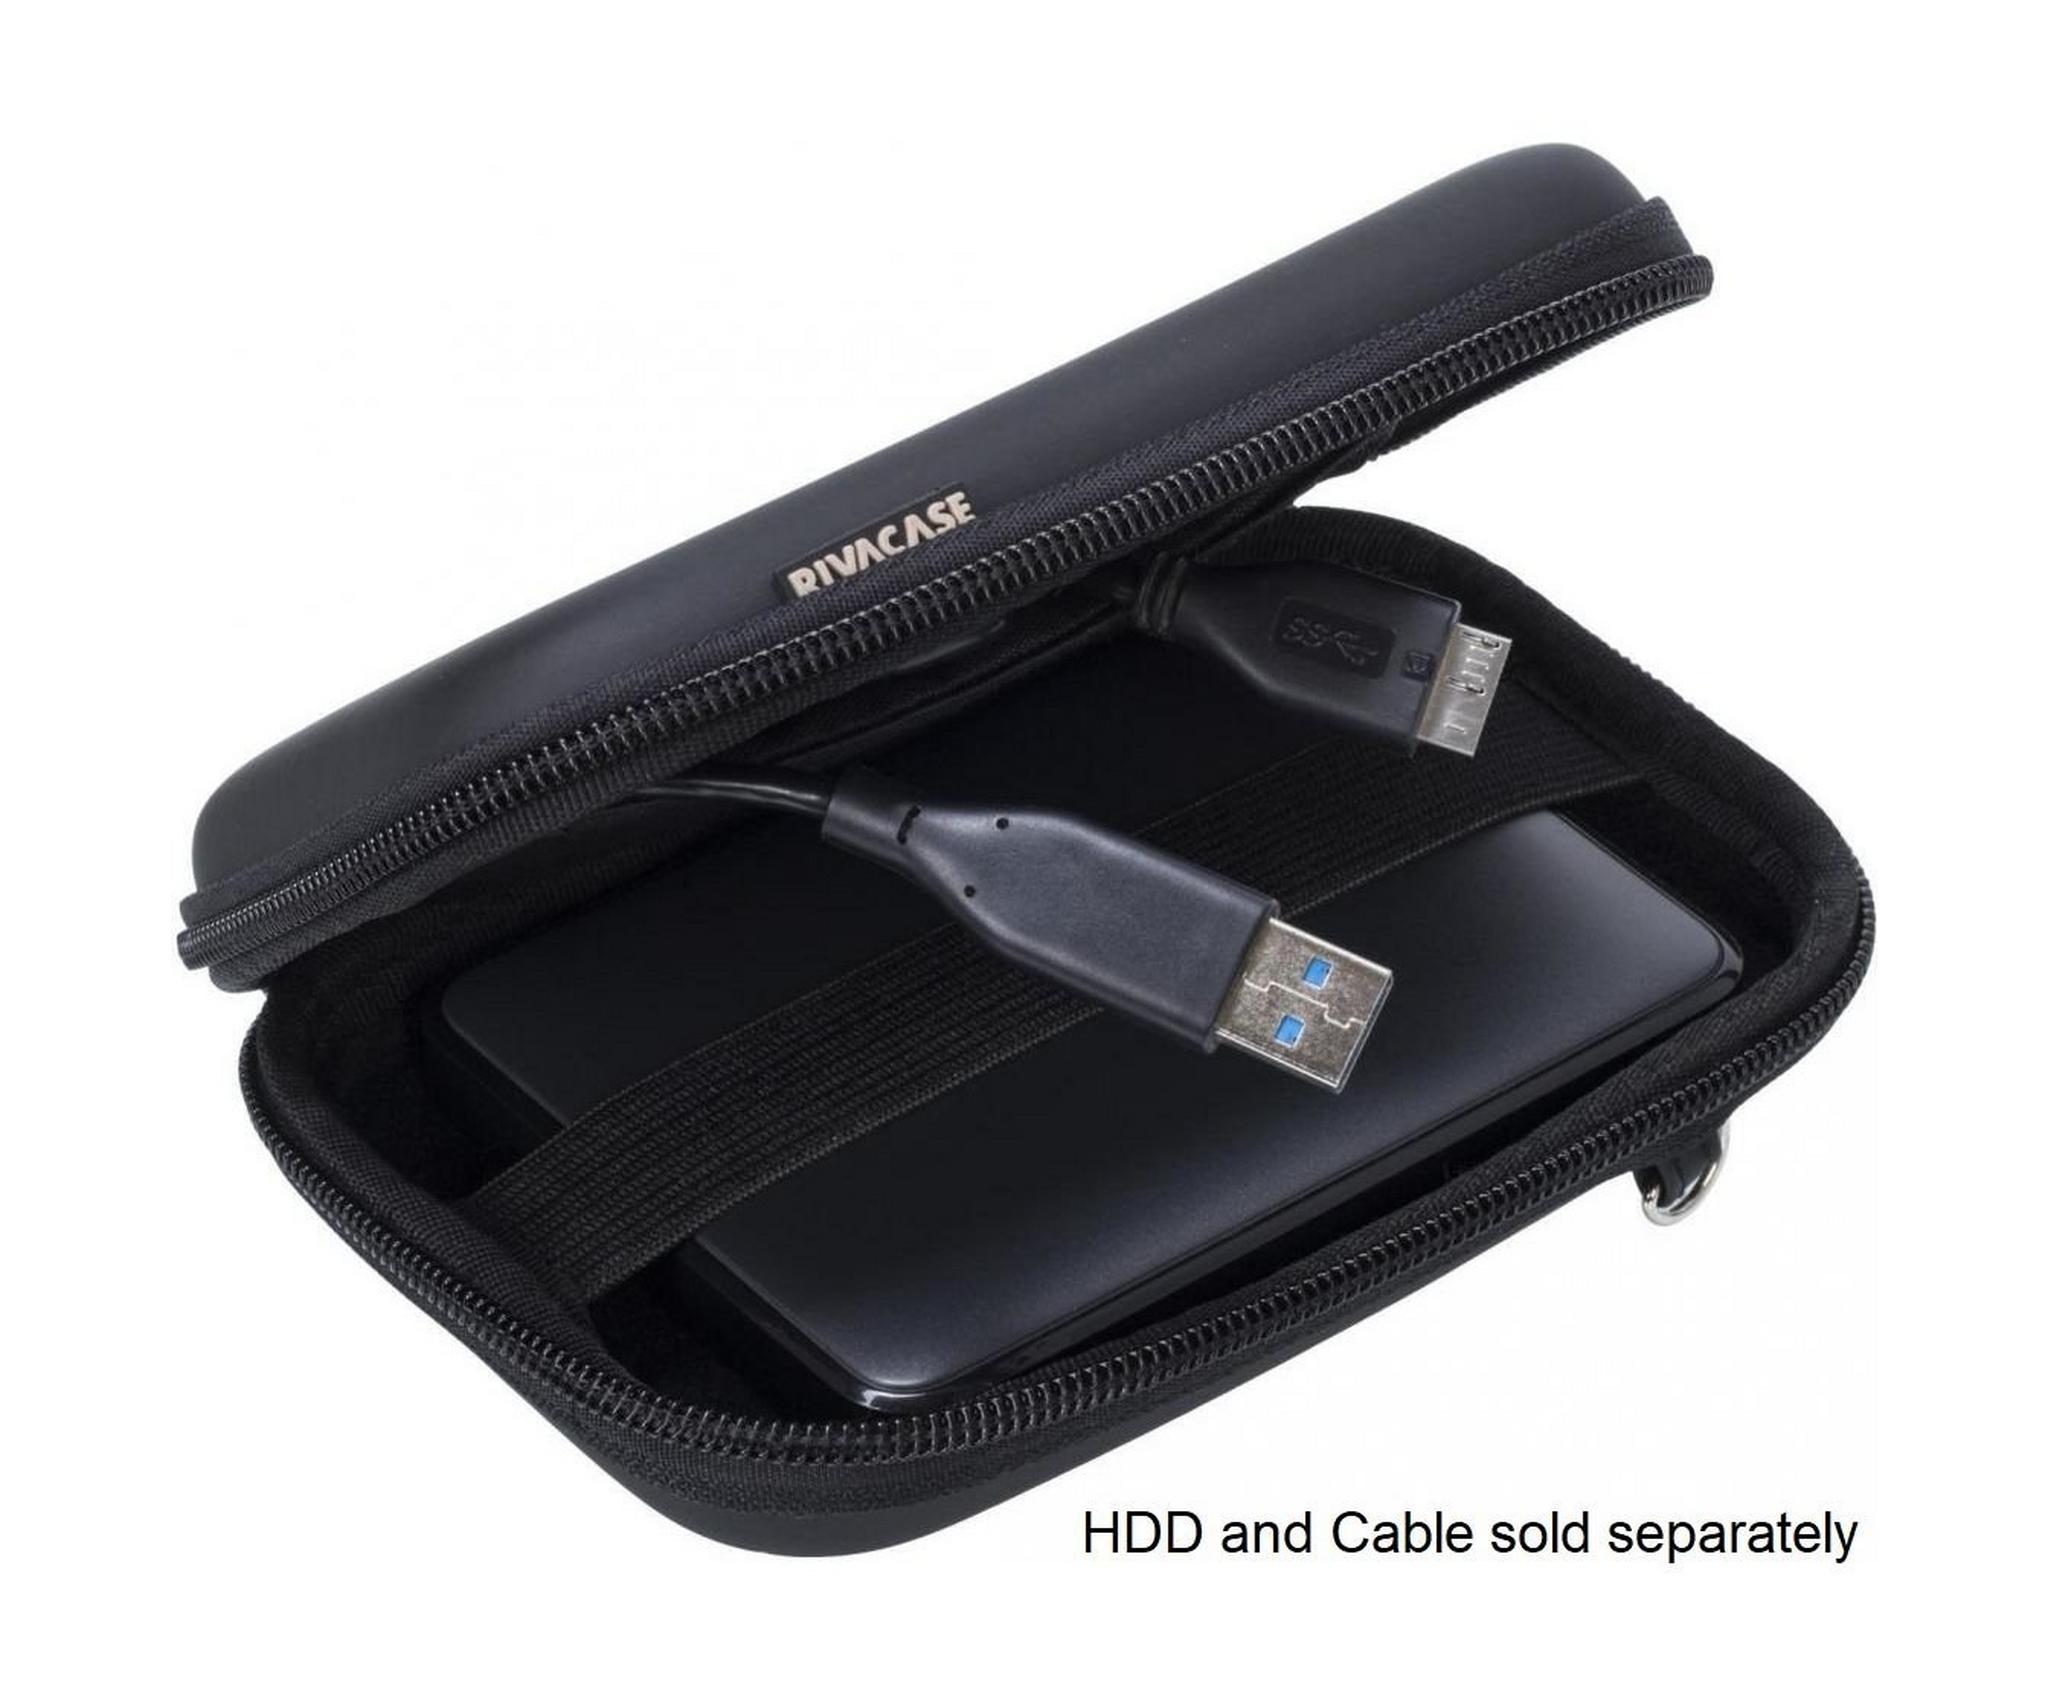 Riva Laptop Bag for up to 15.6-inch + Riva 2.5-inch HDD Case + Riva Wireless Mouse